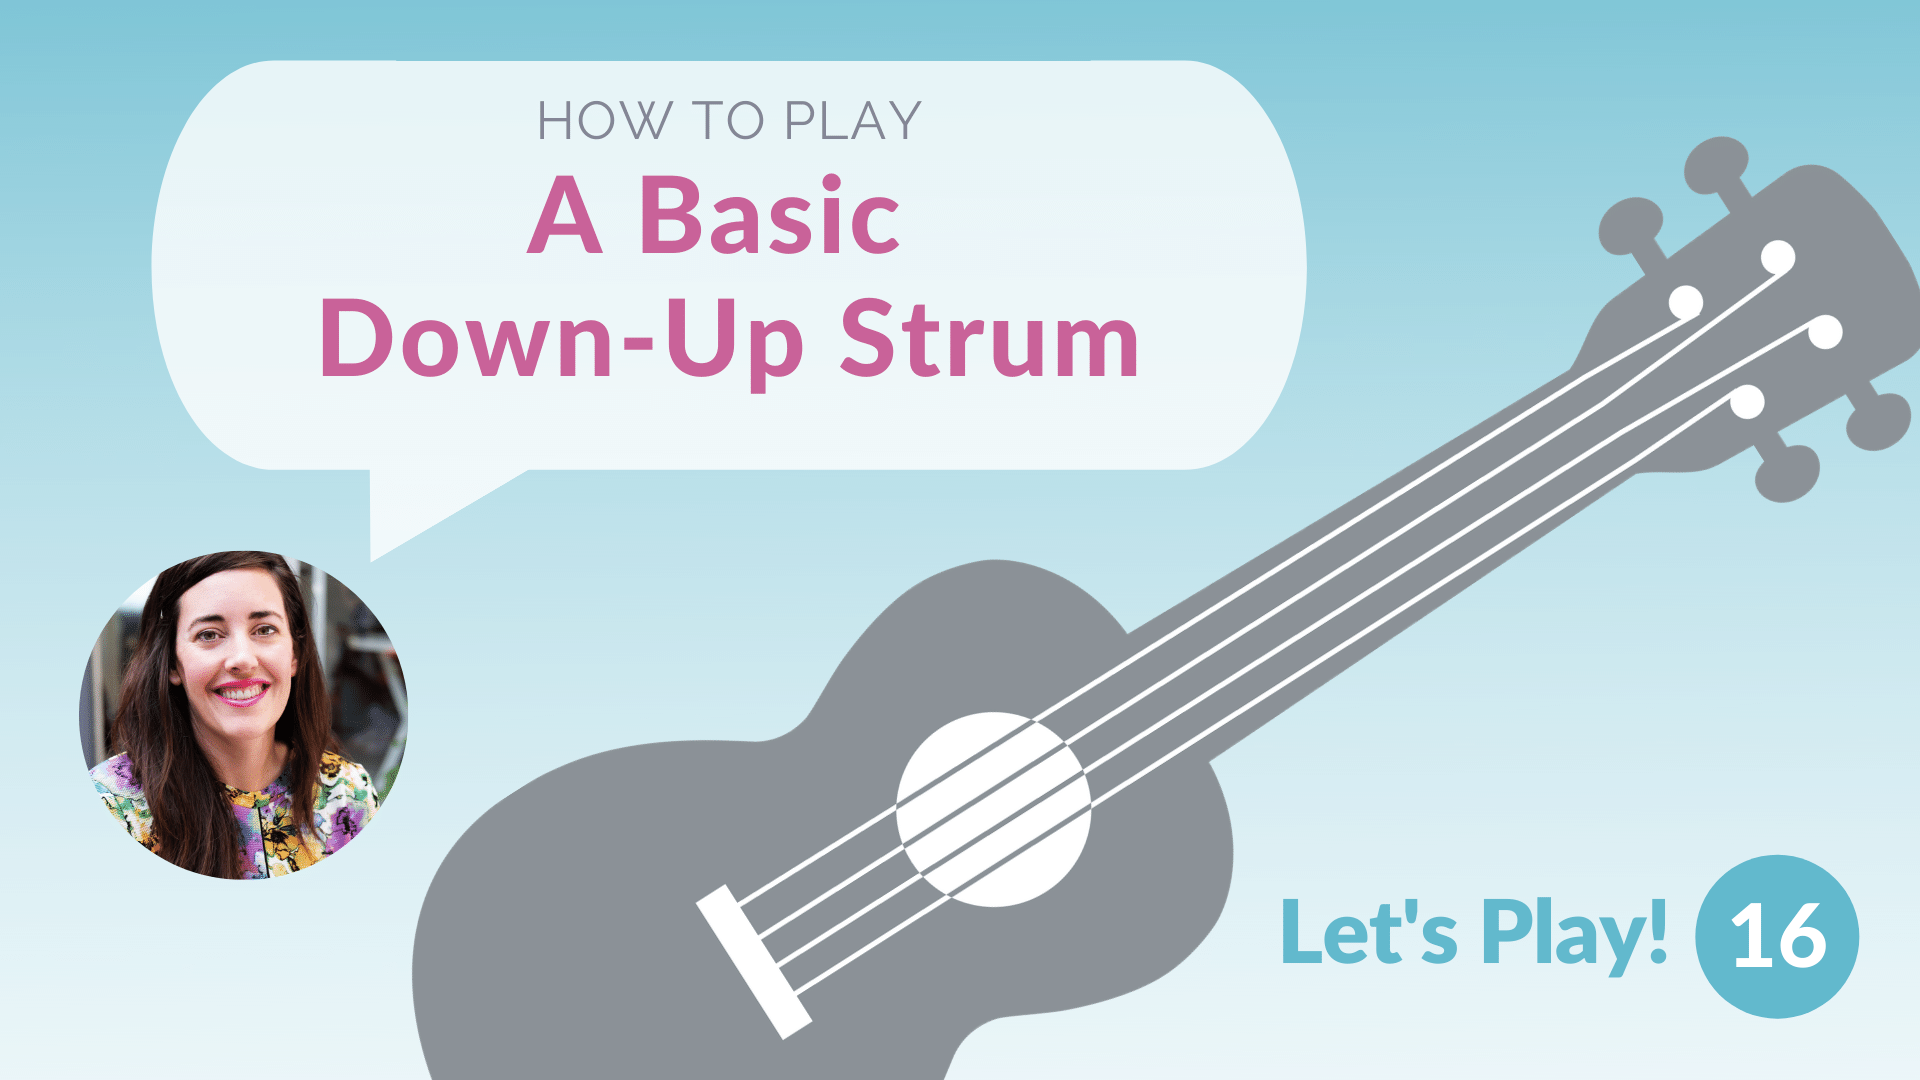 Play a Basic Down-Up Strum